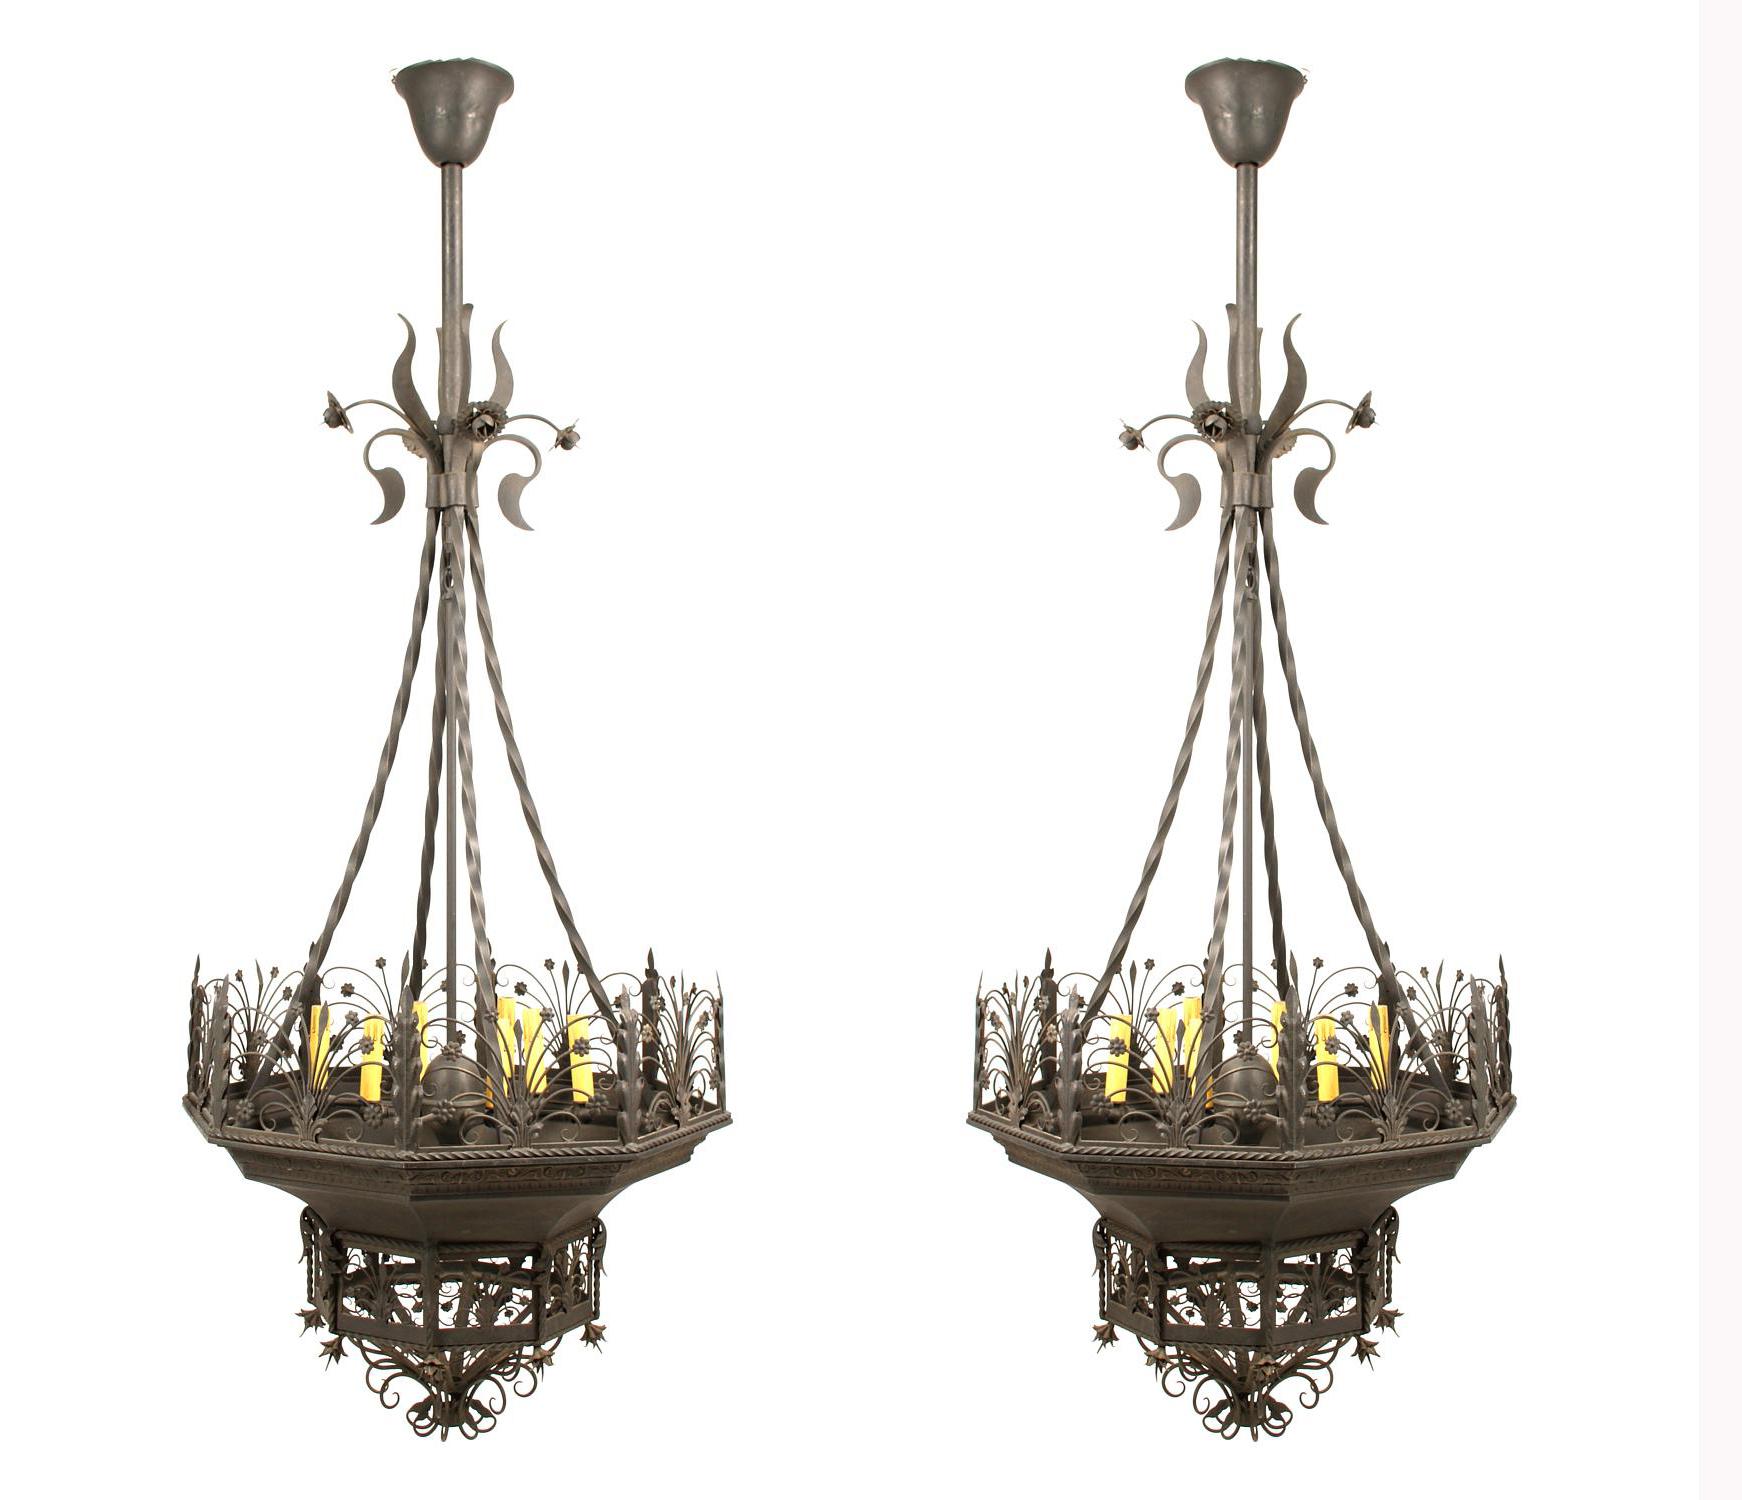 Attractive Italian pair of hand forged wrought iron and tole 6 light chandeliers, first half of the 20th century.
In the Gothic style. finely detailed with antique black patina.
Electrified for the American market.
Measures: H.54